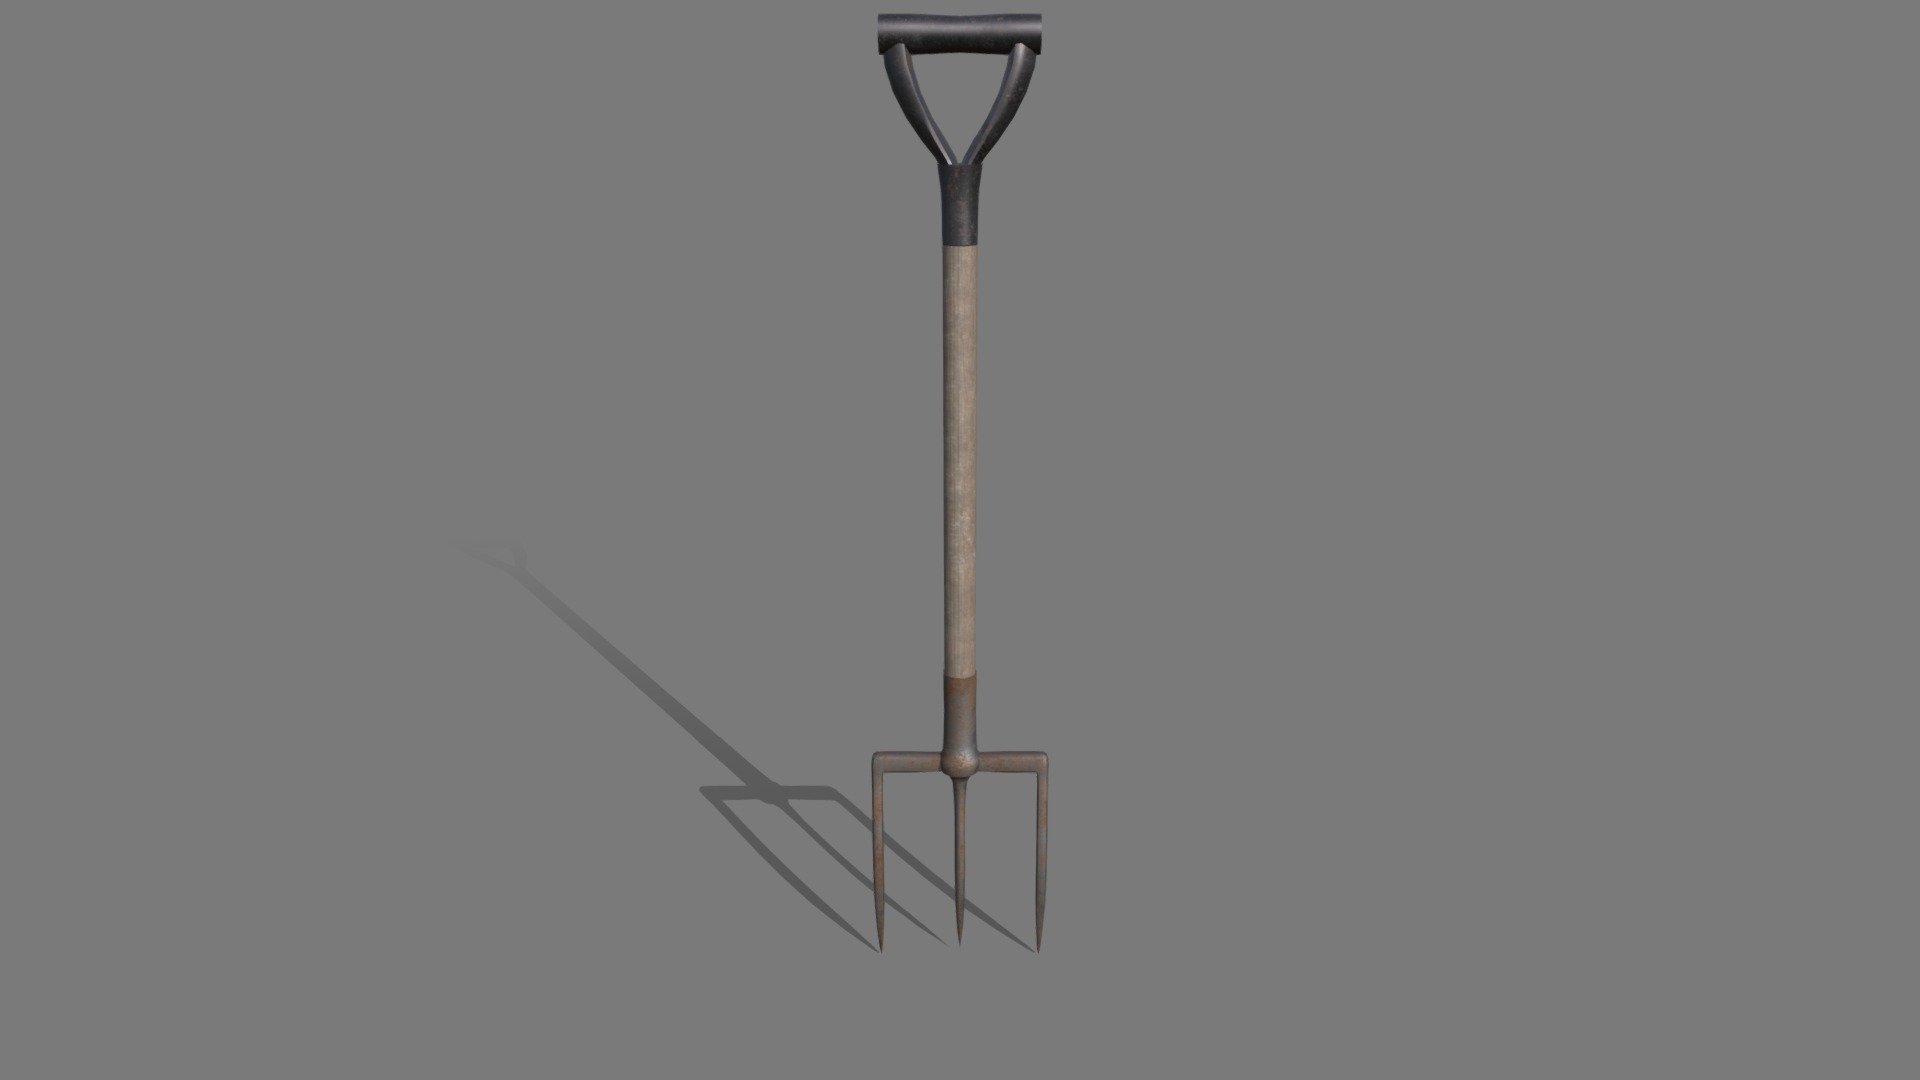 Pitchfork 3D model part of the Farming Tools Pack v2 made specifically for Realtime Rendering engines. Check out my artstation account for more info: https://www.artstation.com/artwork/8l6N2x - Pitchfork - Buy Royalty Free 3D model by Pixel Hearts (@pixelhearts) 3d model